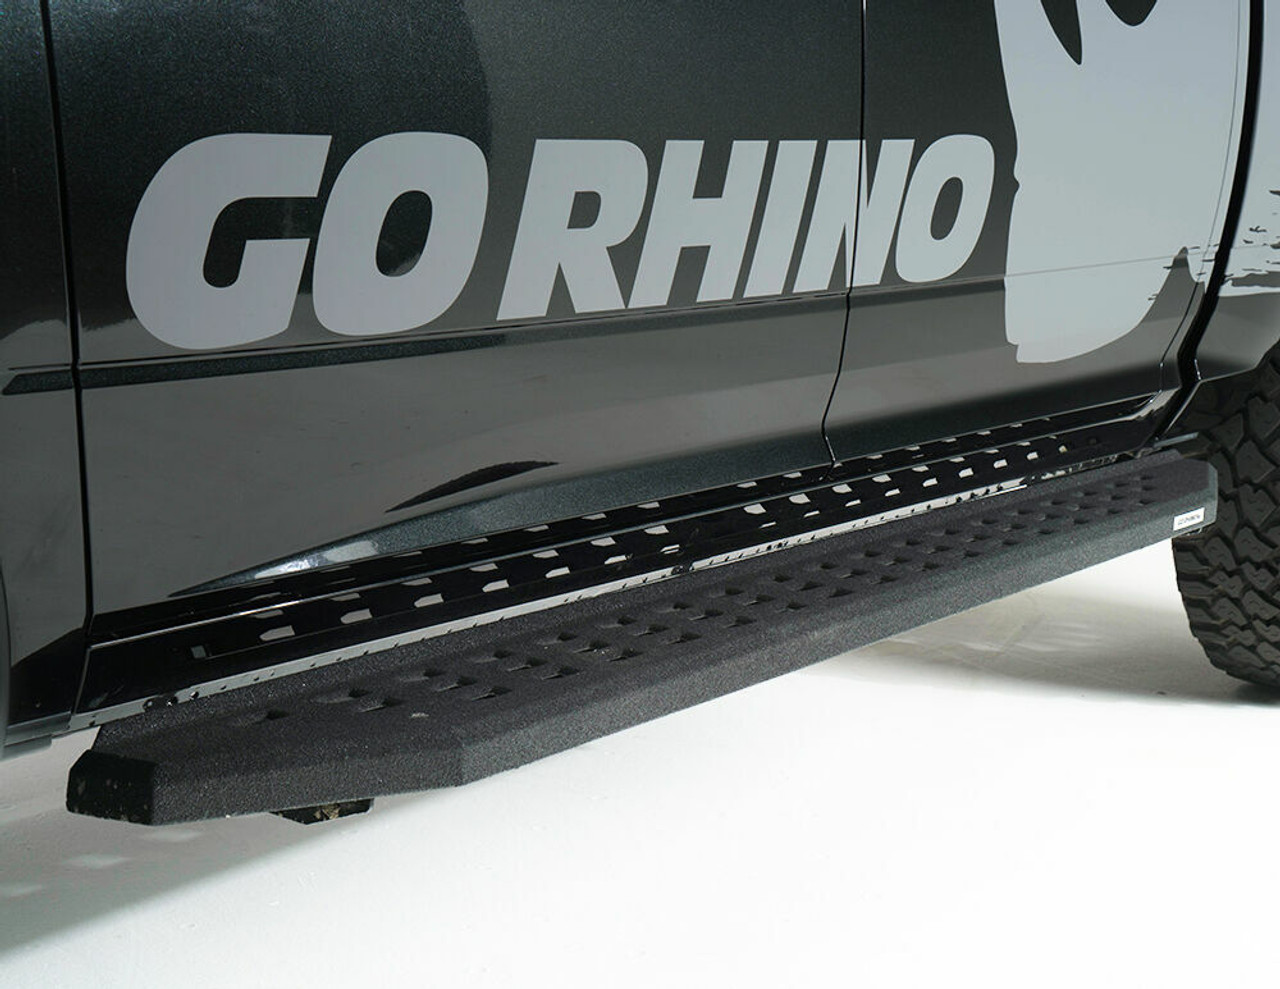 Go Rhino 69405880PC Chevrolet, Silverado 1500 LD (Classic), 2014 - 2019, RB20 Running boards - Complete Kit: RB20 Running boards + Brackets, Galvanized Steel, Textured black, 69400080PC RB20 + 6940475 RB Brackets, Classic Body Style Only